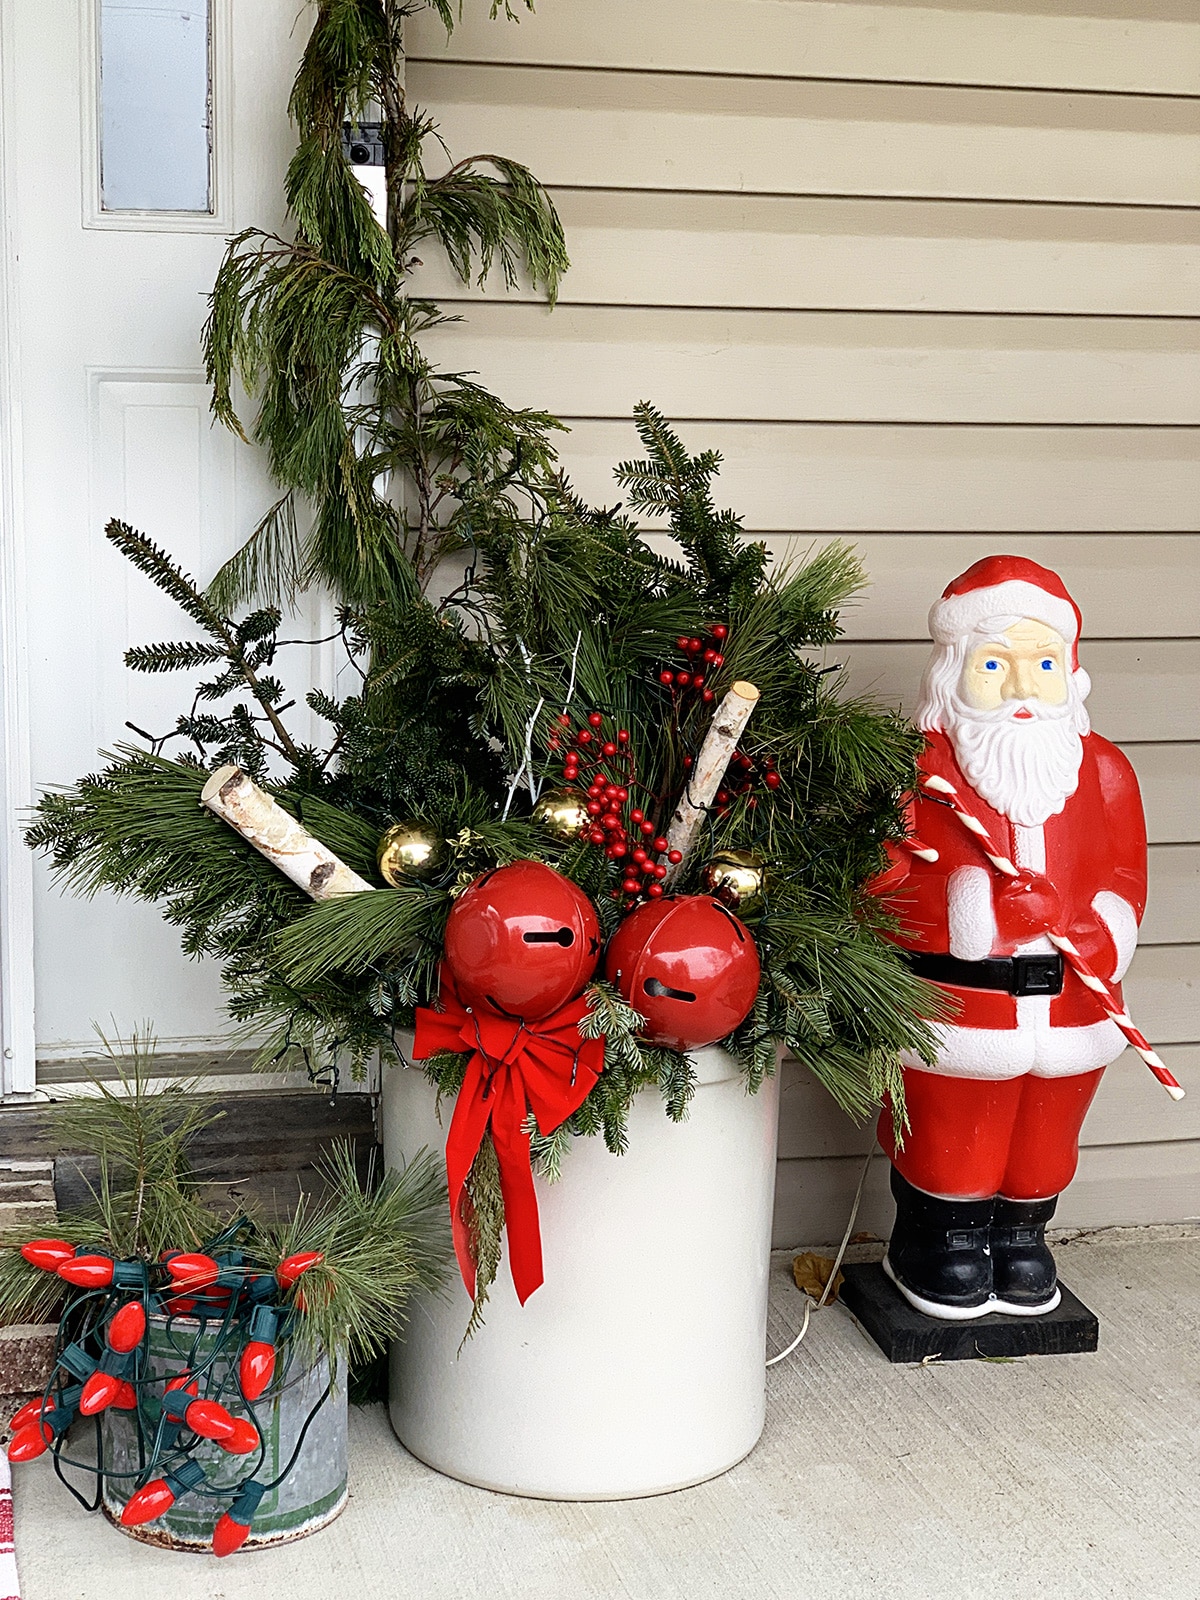 Christmas planter for the front door.